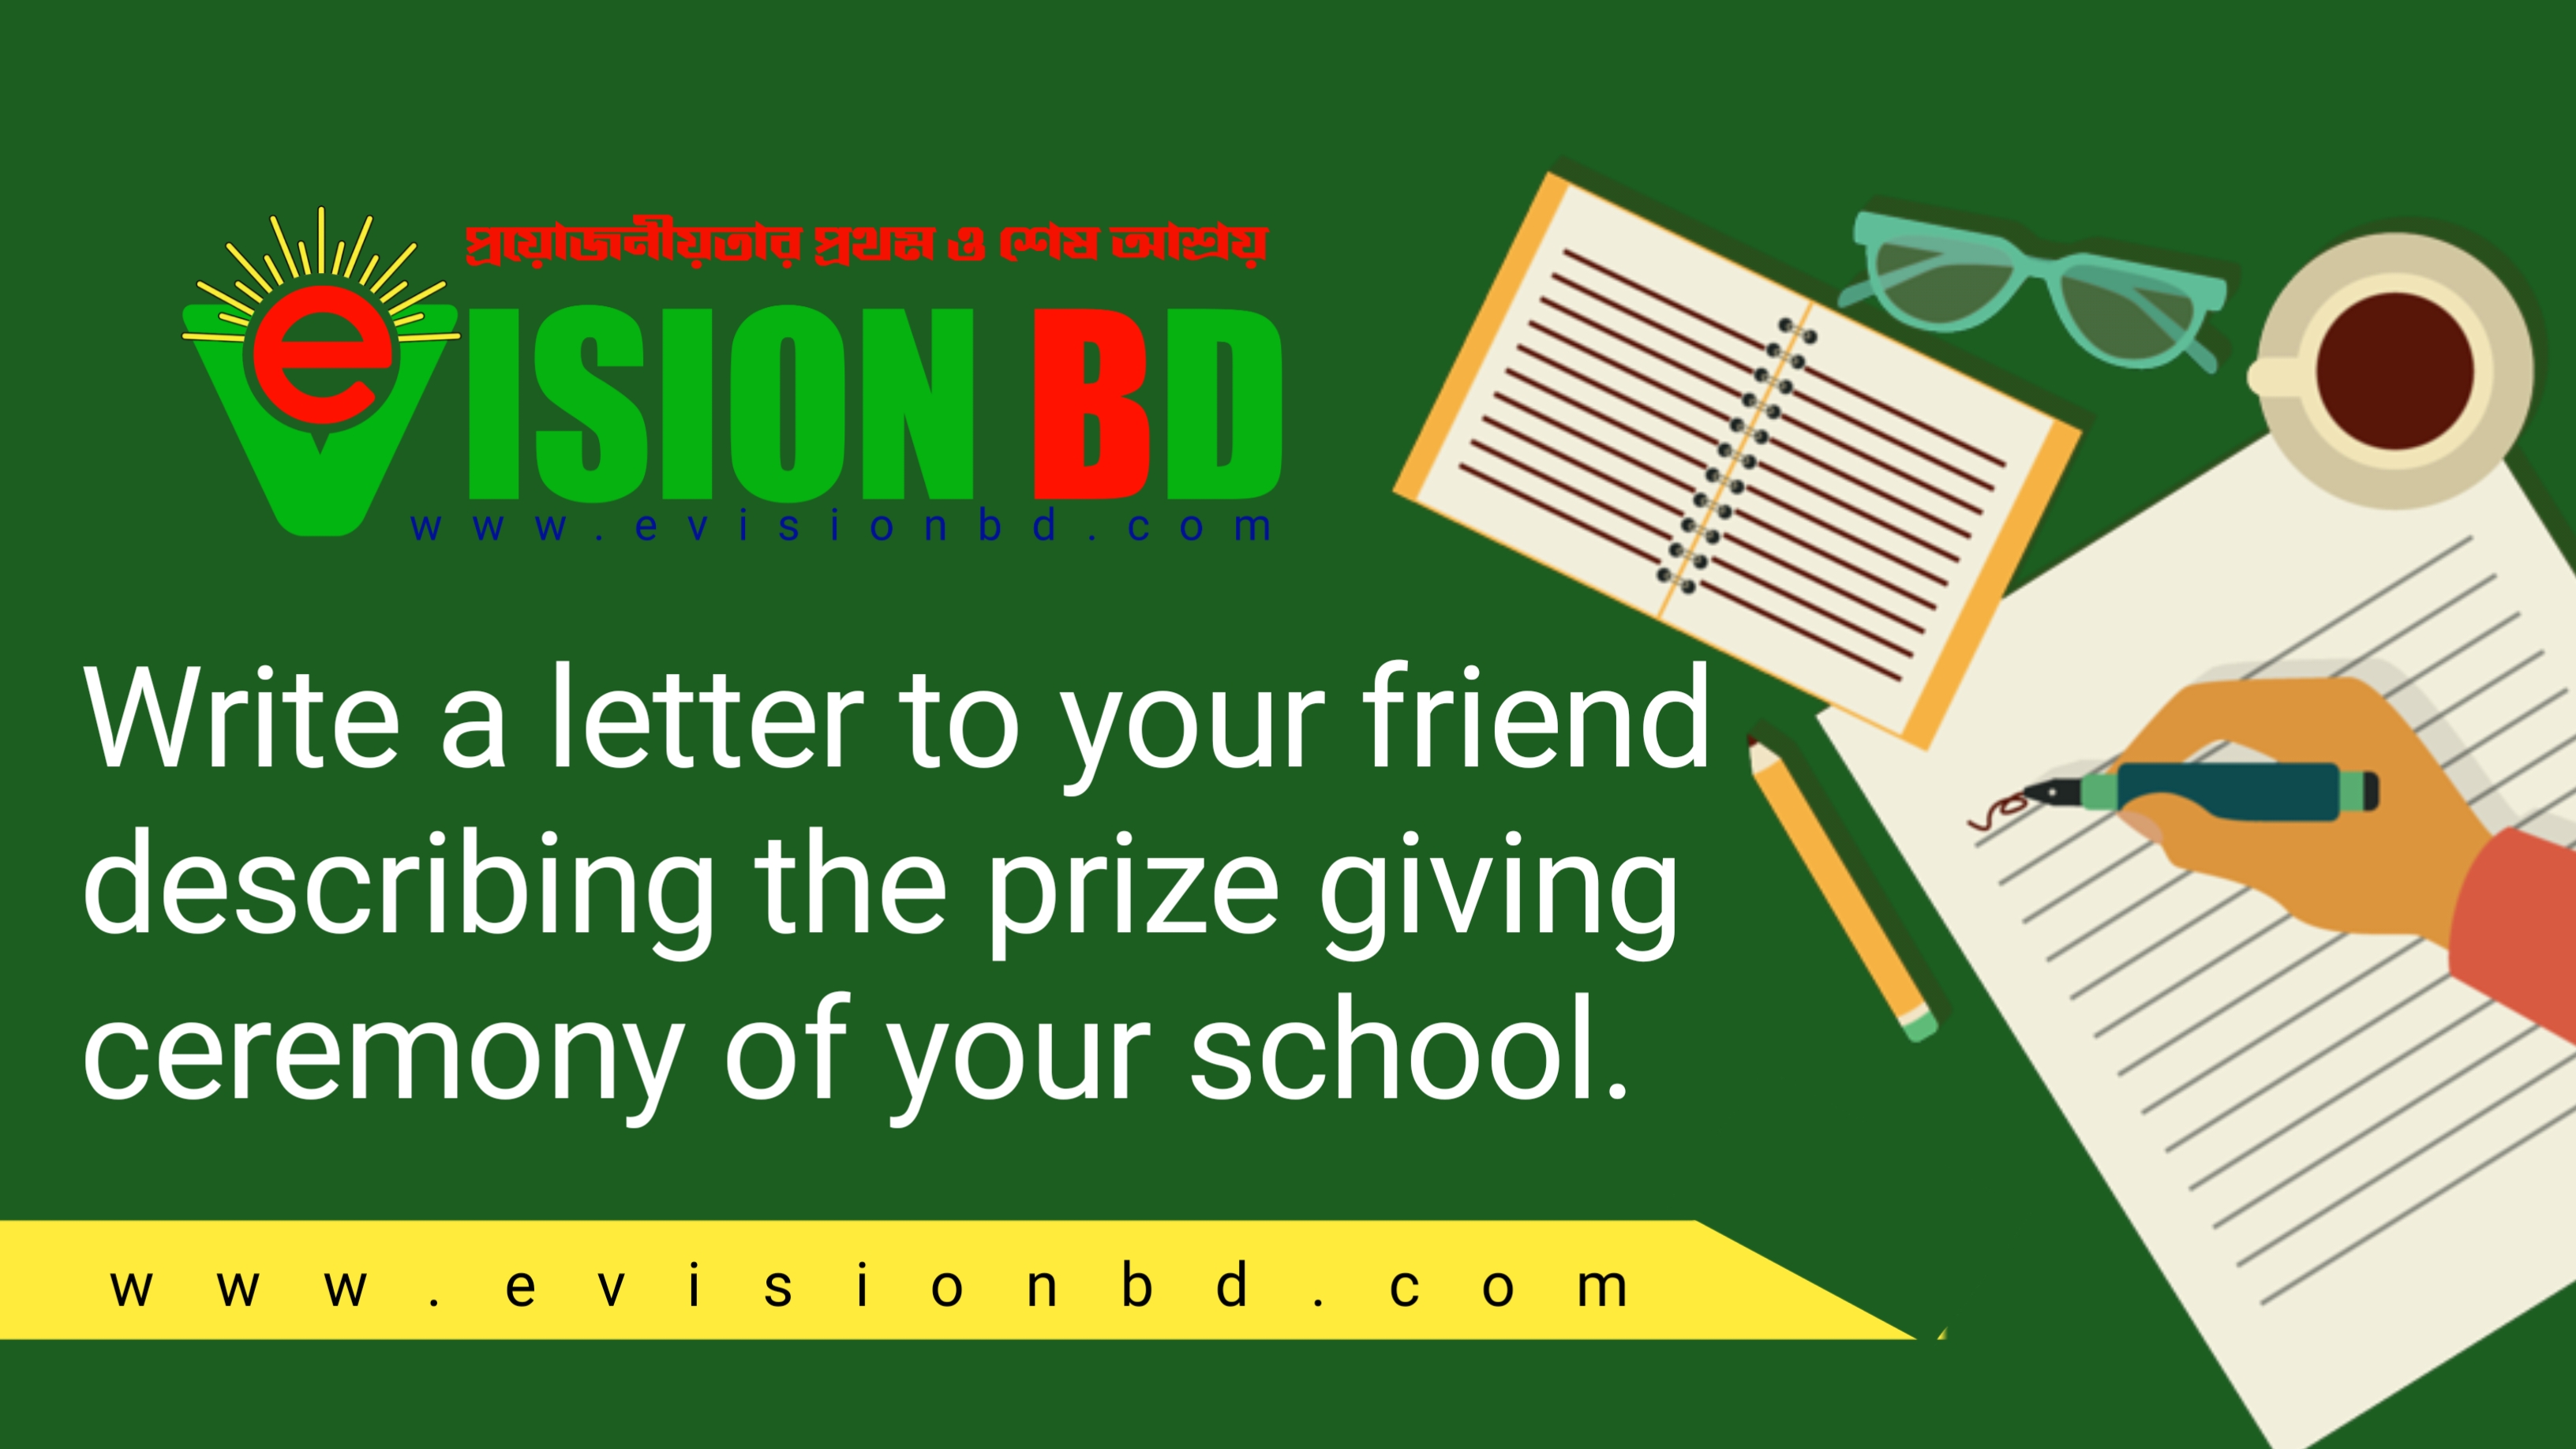 Now, write a letter to your friend describing prize giving ceremony of your school.